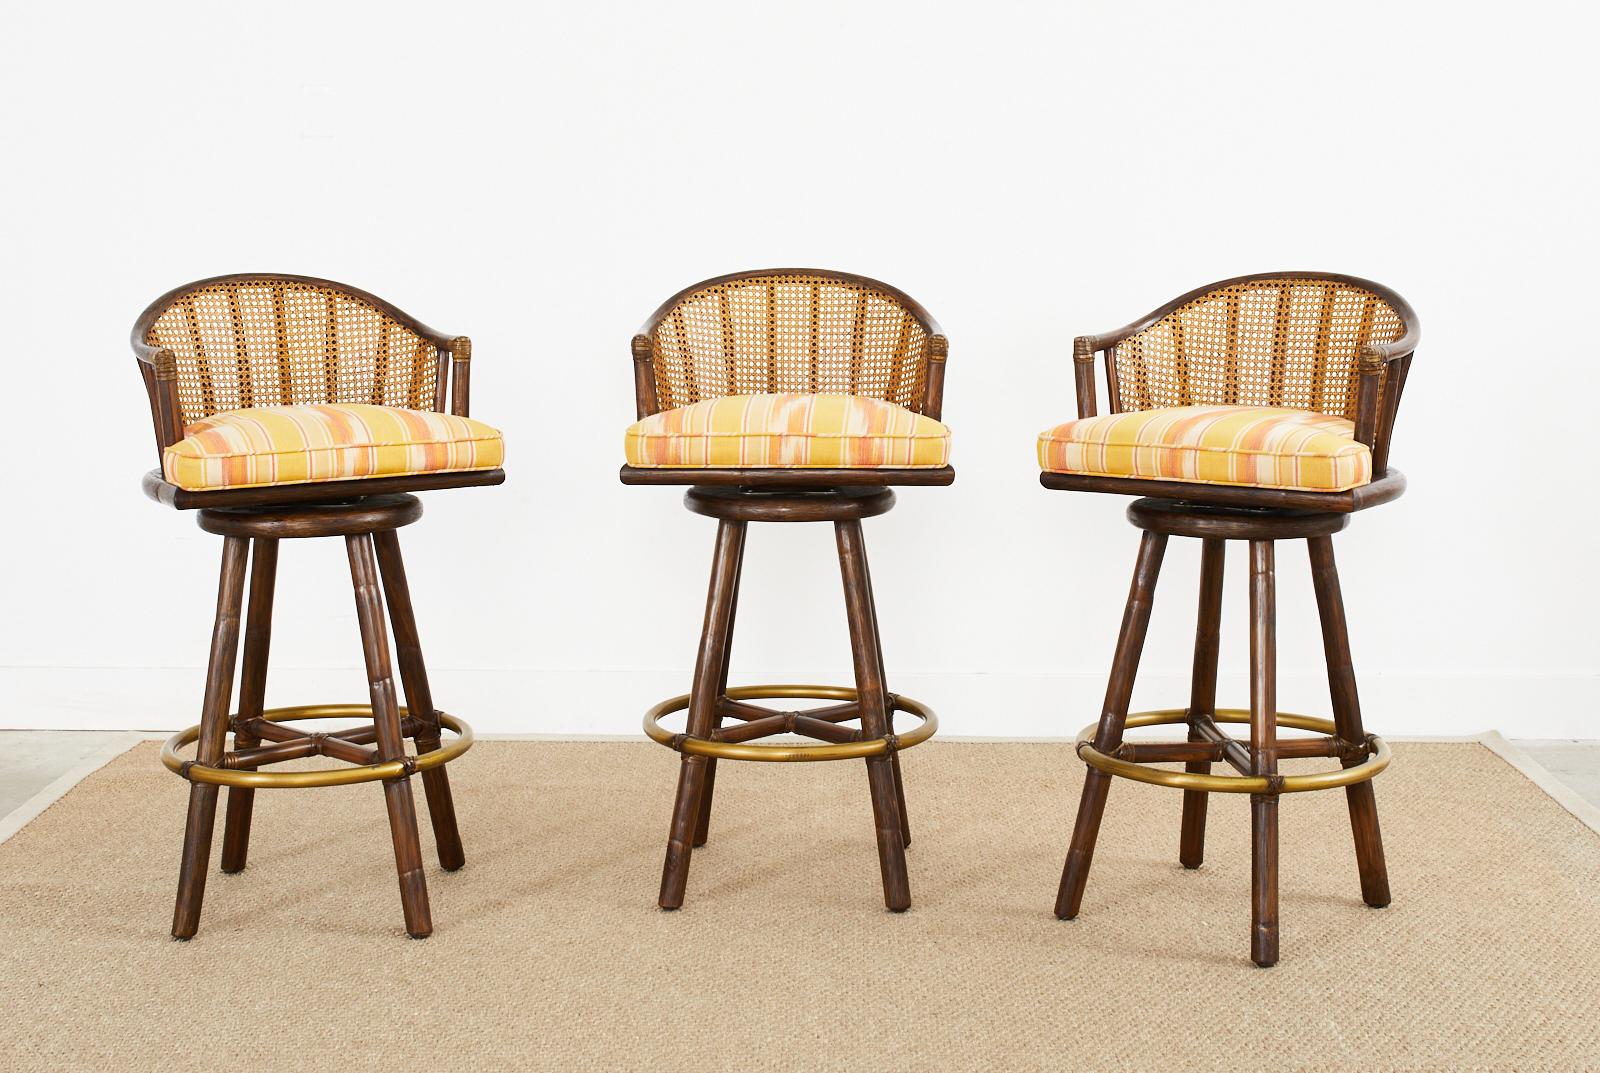 Fabulous genuine set of three organic modern style rattan barstools made by McGuire. The bar height stools feature a gracefully curved back with a cane inset. The swivel seats are upholstered with colorful striped fabric and mounted to a strong four